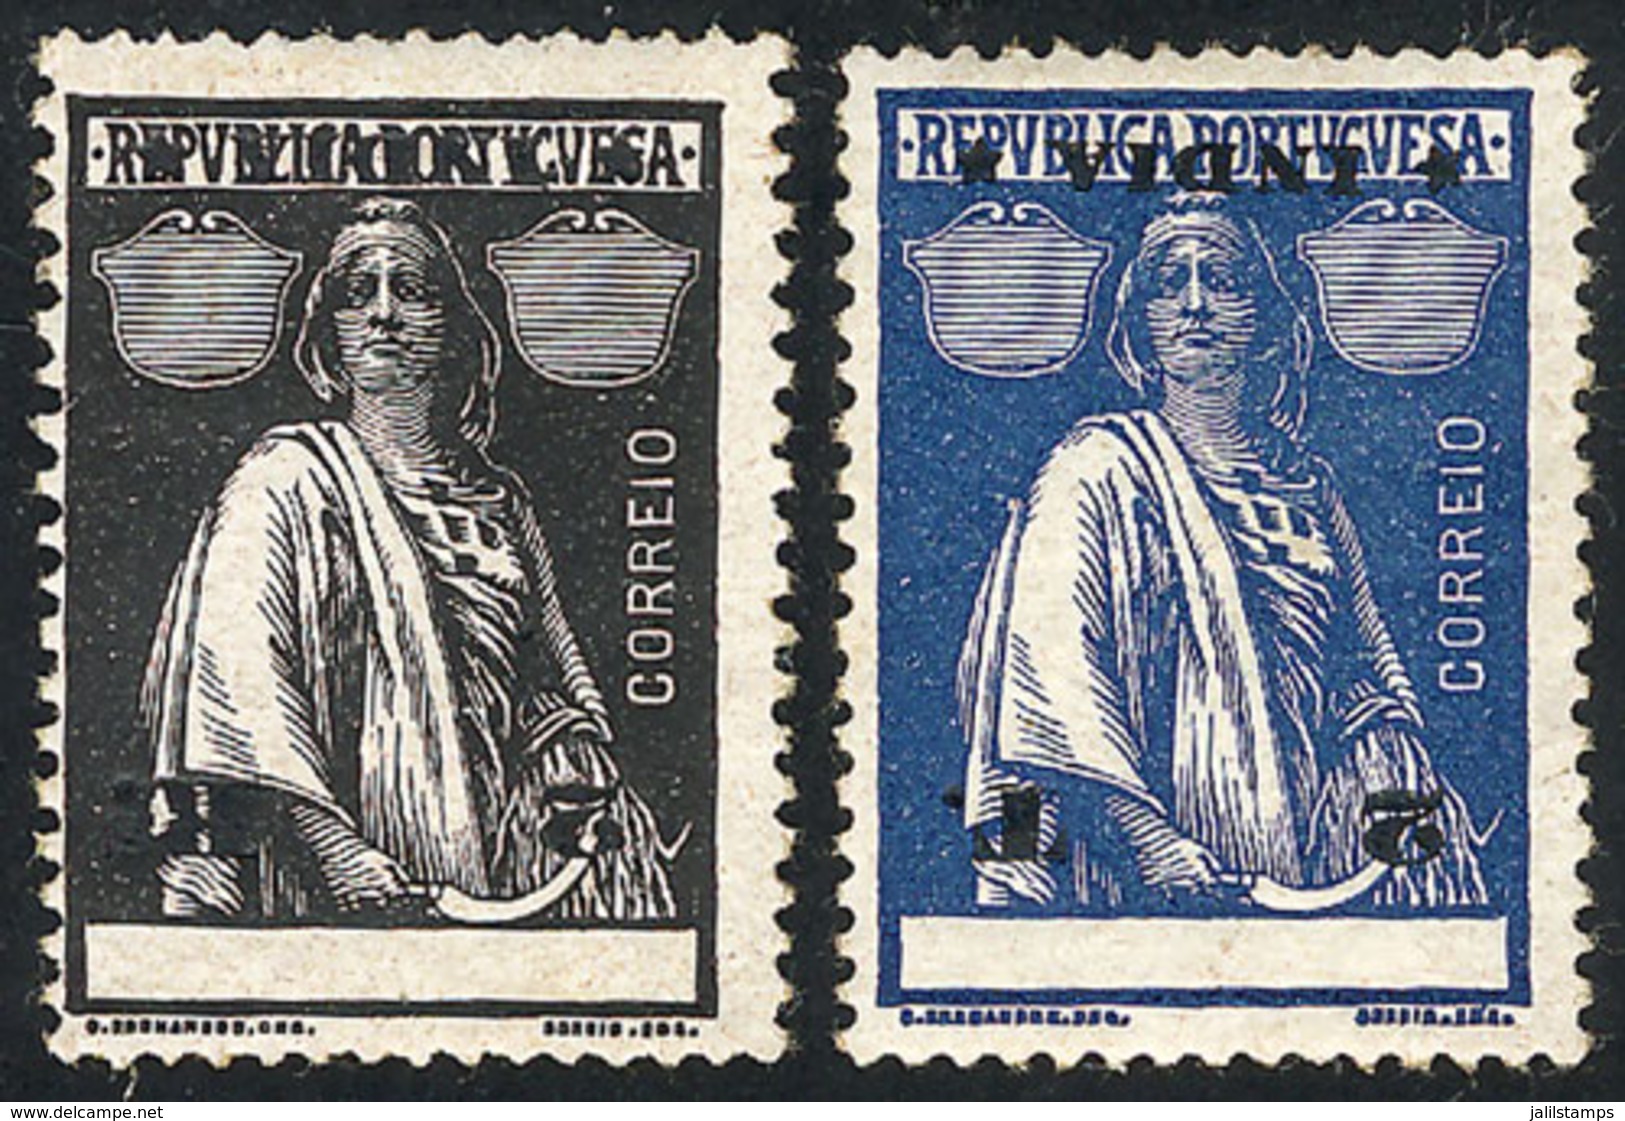 PORTUGUESE INDIA: Sc.359 + 369, 1914 2r. Black And 2T. Blue, Both With Impression Of BLACK COLOR INVERTED, VF! - Portugiesisch-Indien